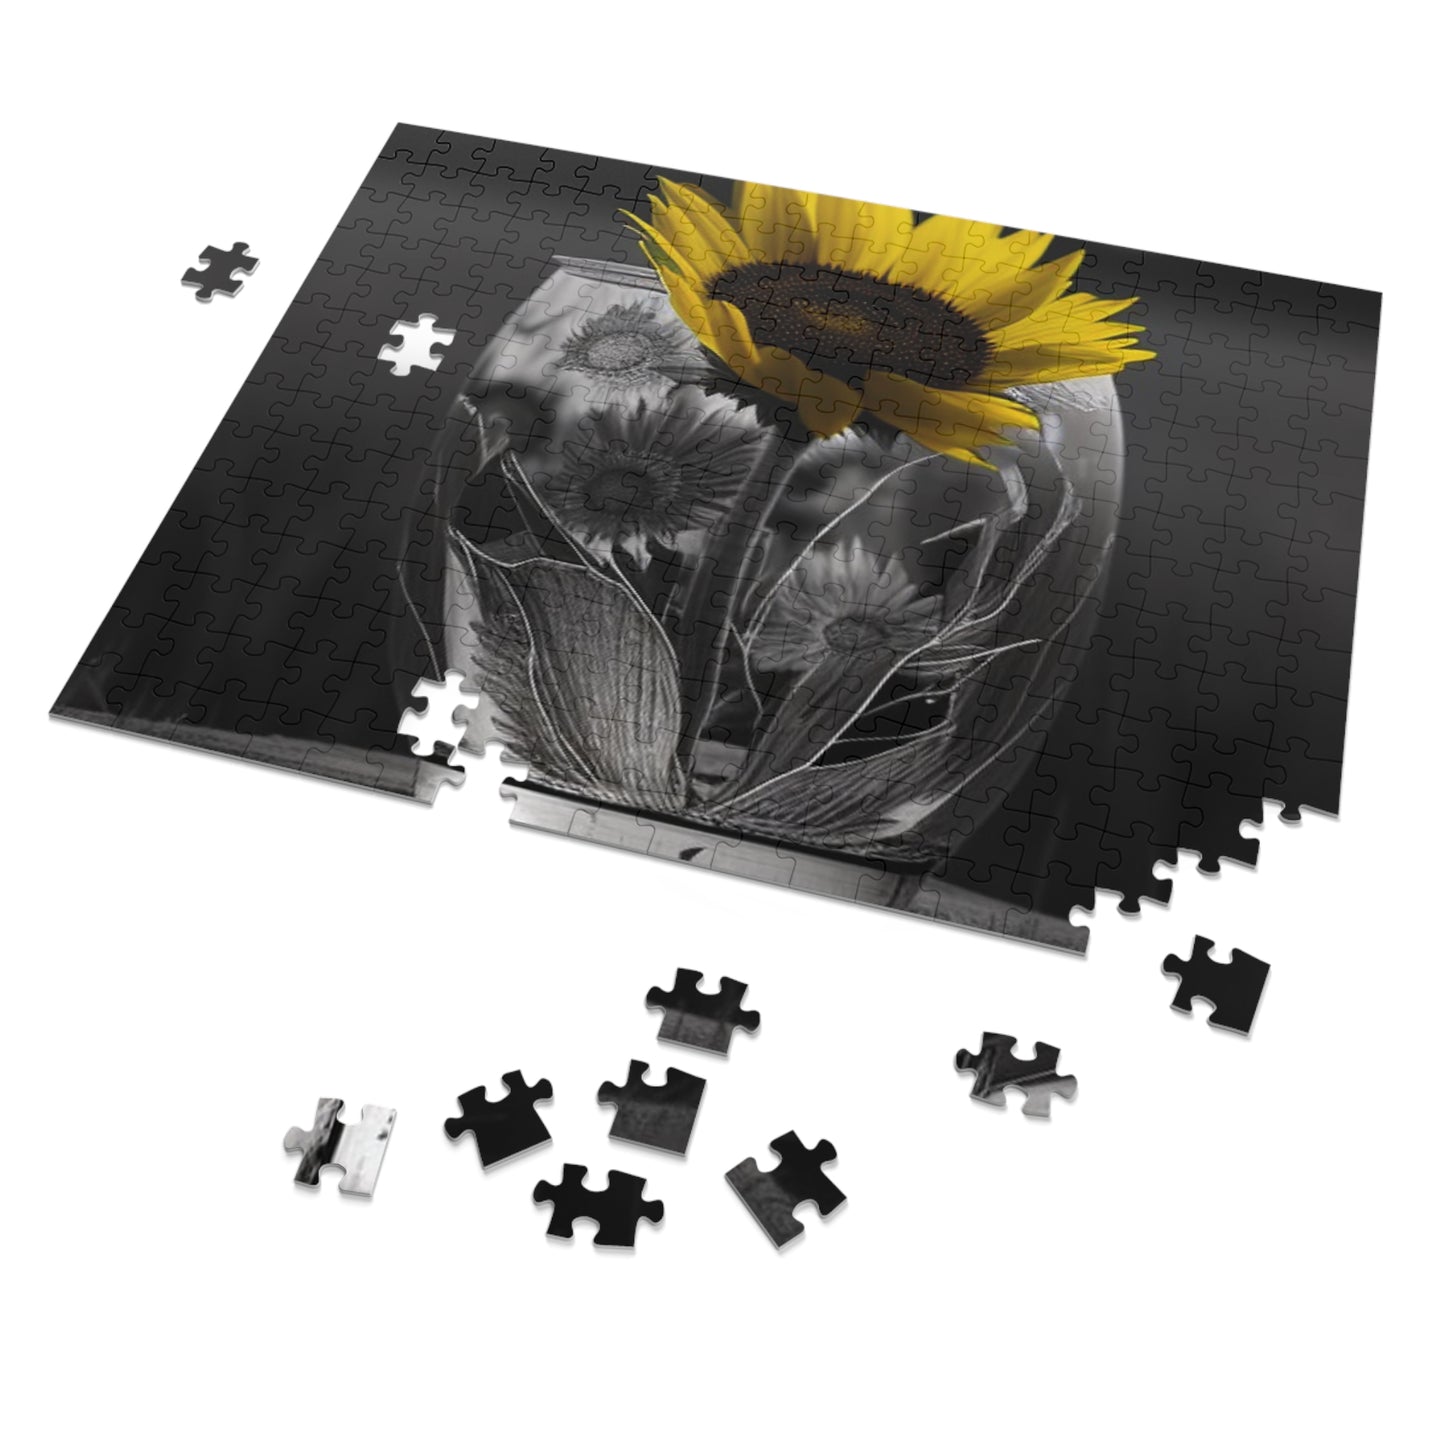 Jigsaw Puzzle (30, 110, 252, 500,1000-Piece) Yellw Sunflower in a vase 1